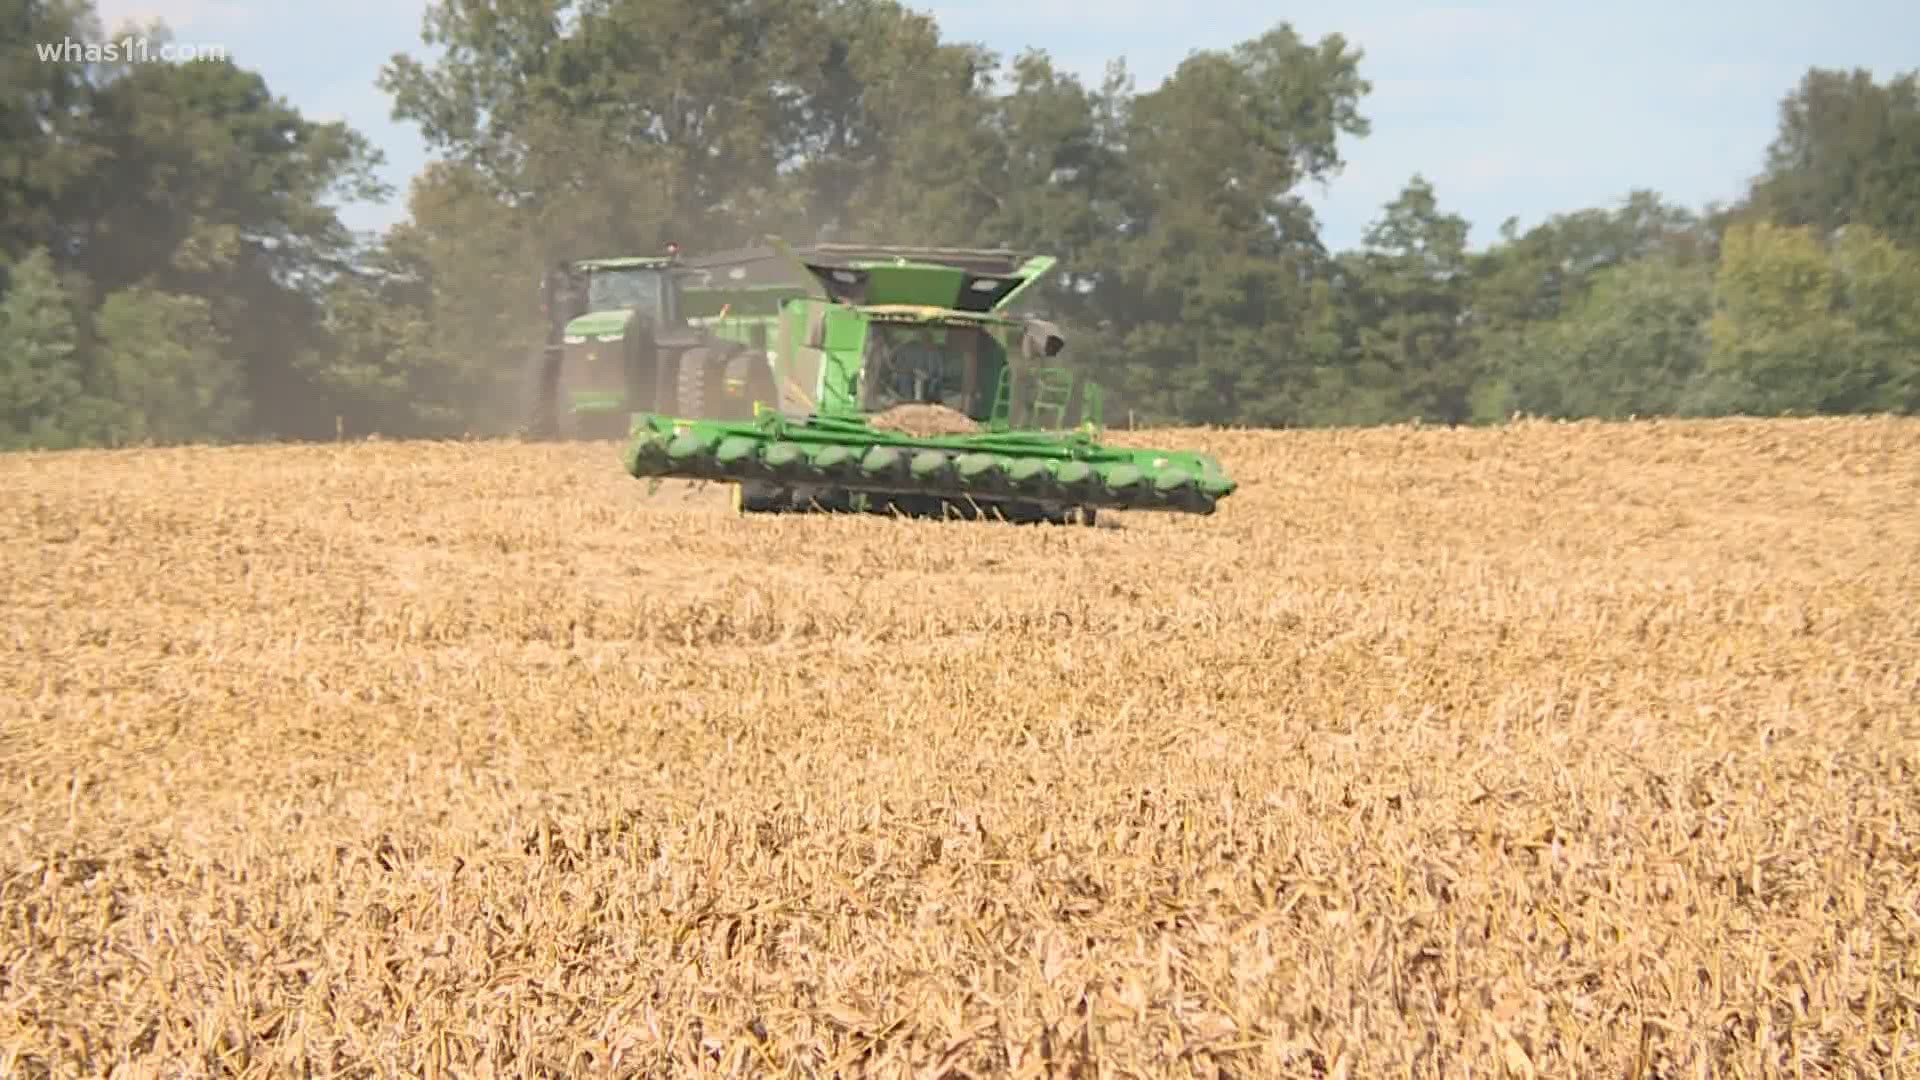 Kentucky farmers impacted by COVID-19 could see relief | www.lvbagssale.com